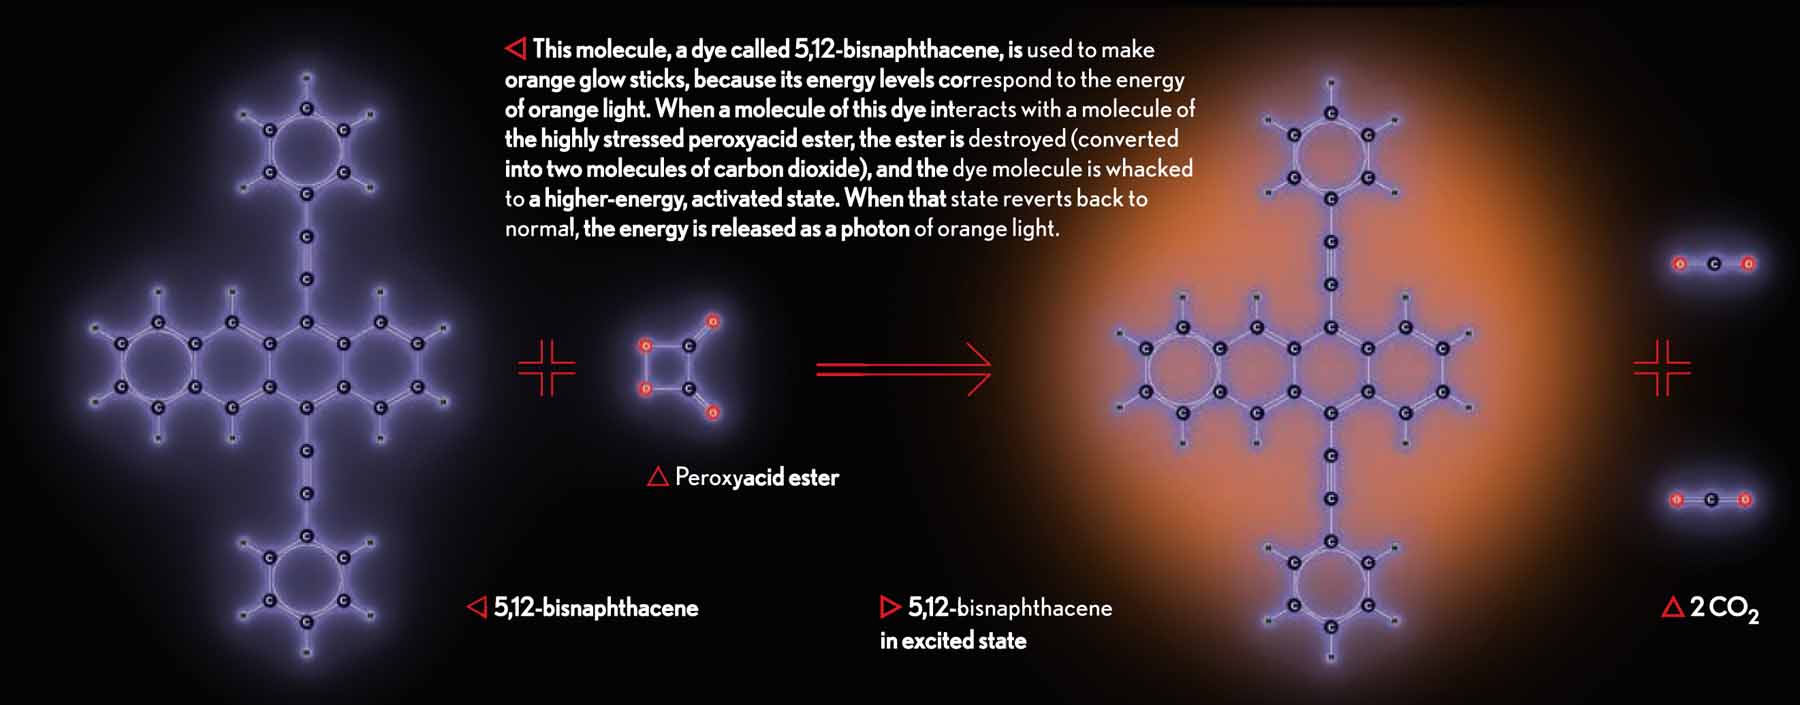 To get light from a chemical mechanism you need a molecule that is able to - photo 8